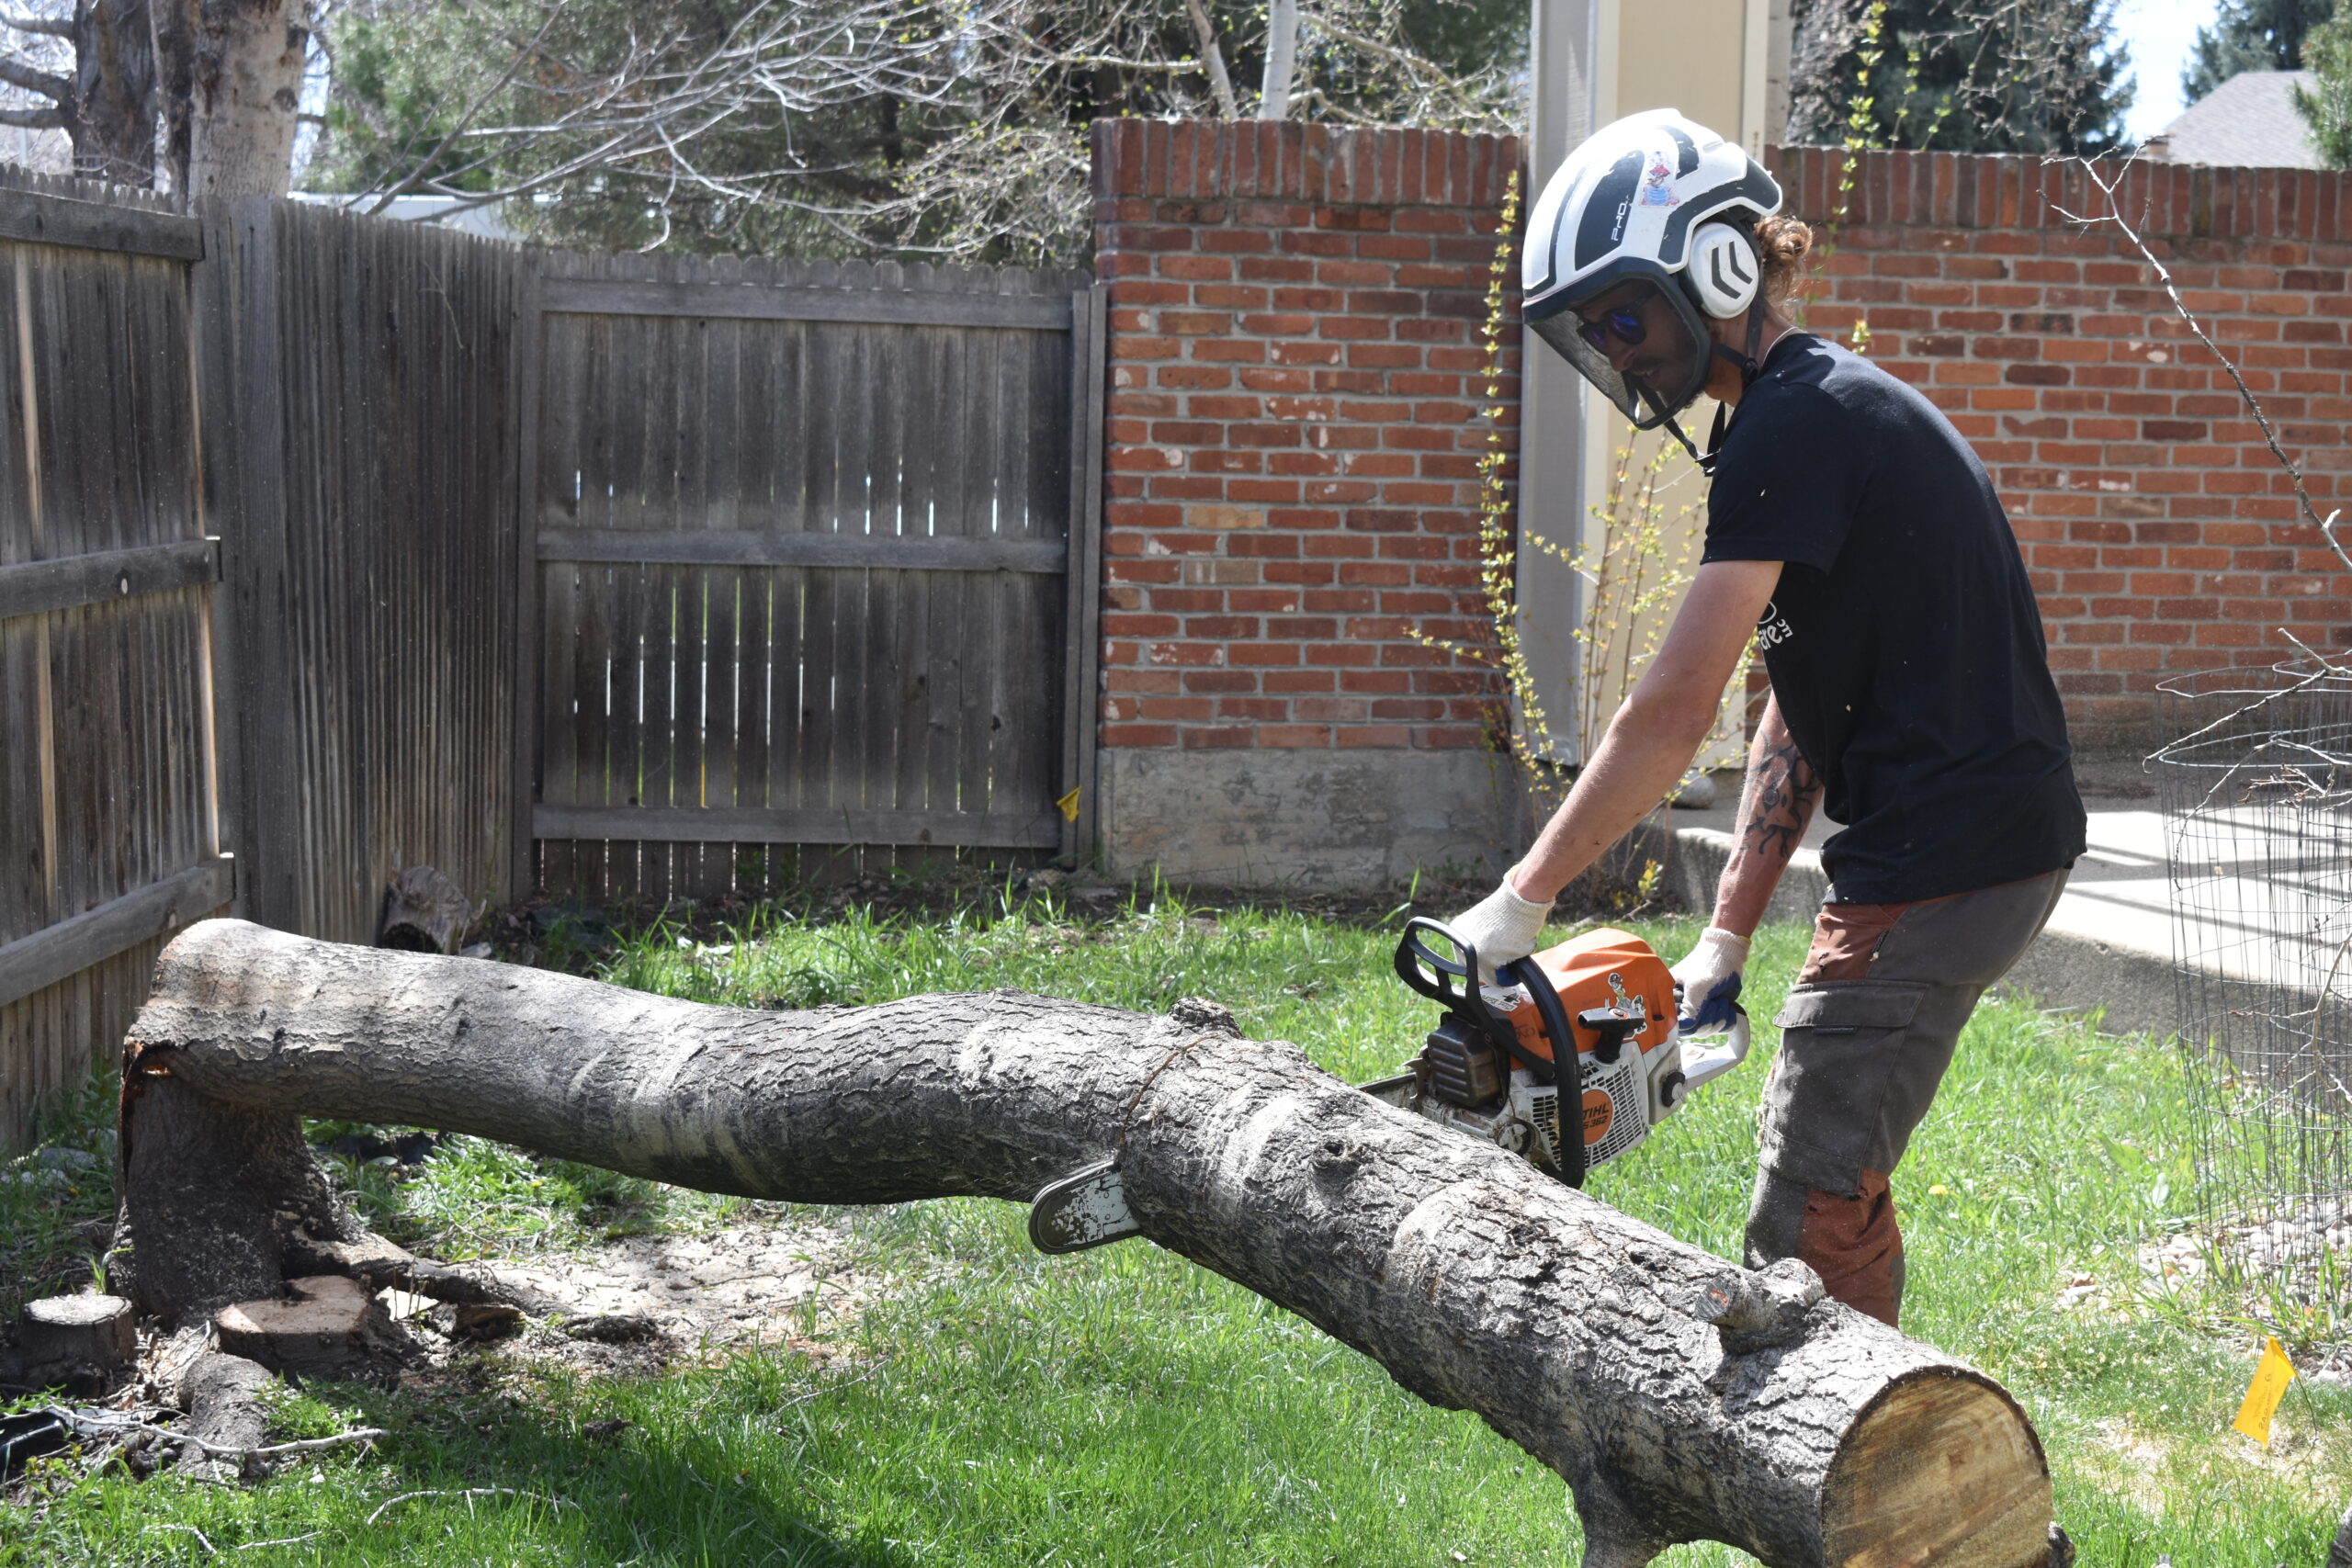 A long tree trunk being cut down in size by an arborist wielding a chainsaw during storm damage tree removal services in Denver, CO.